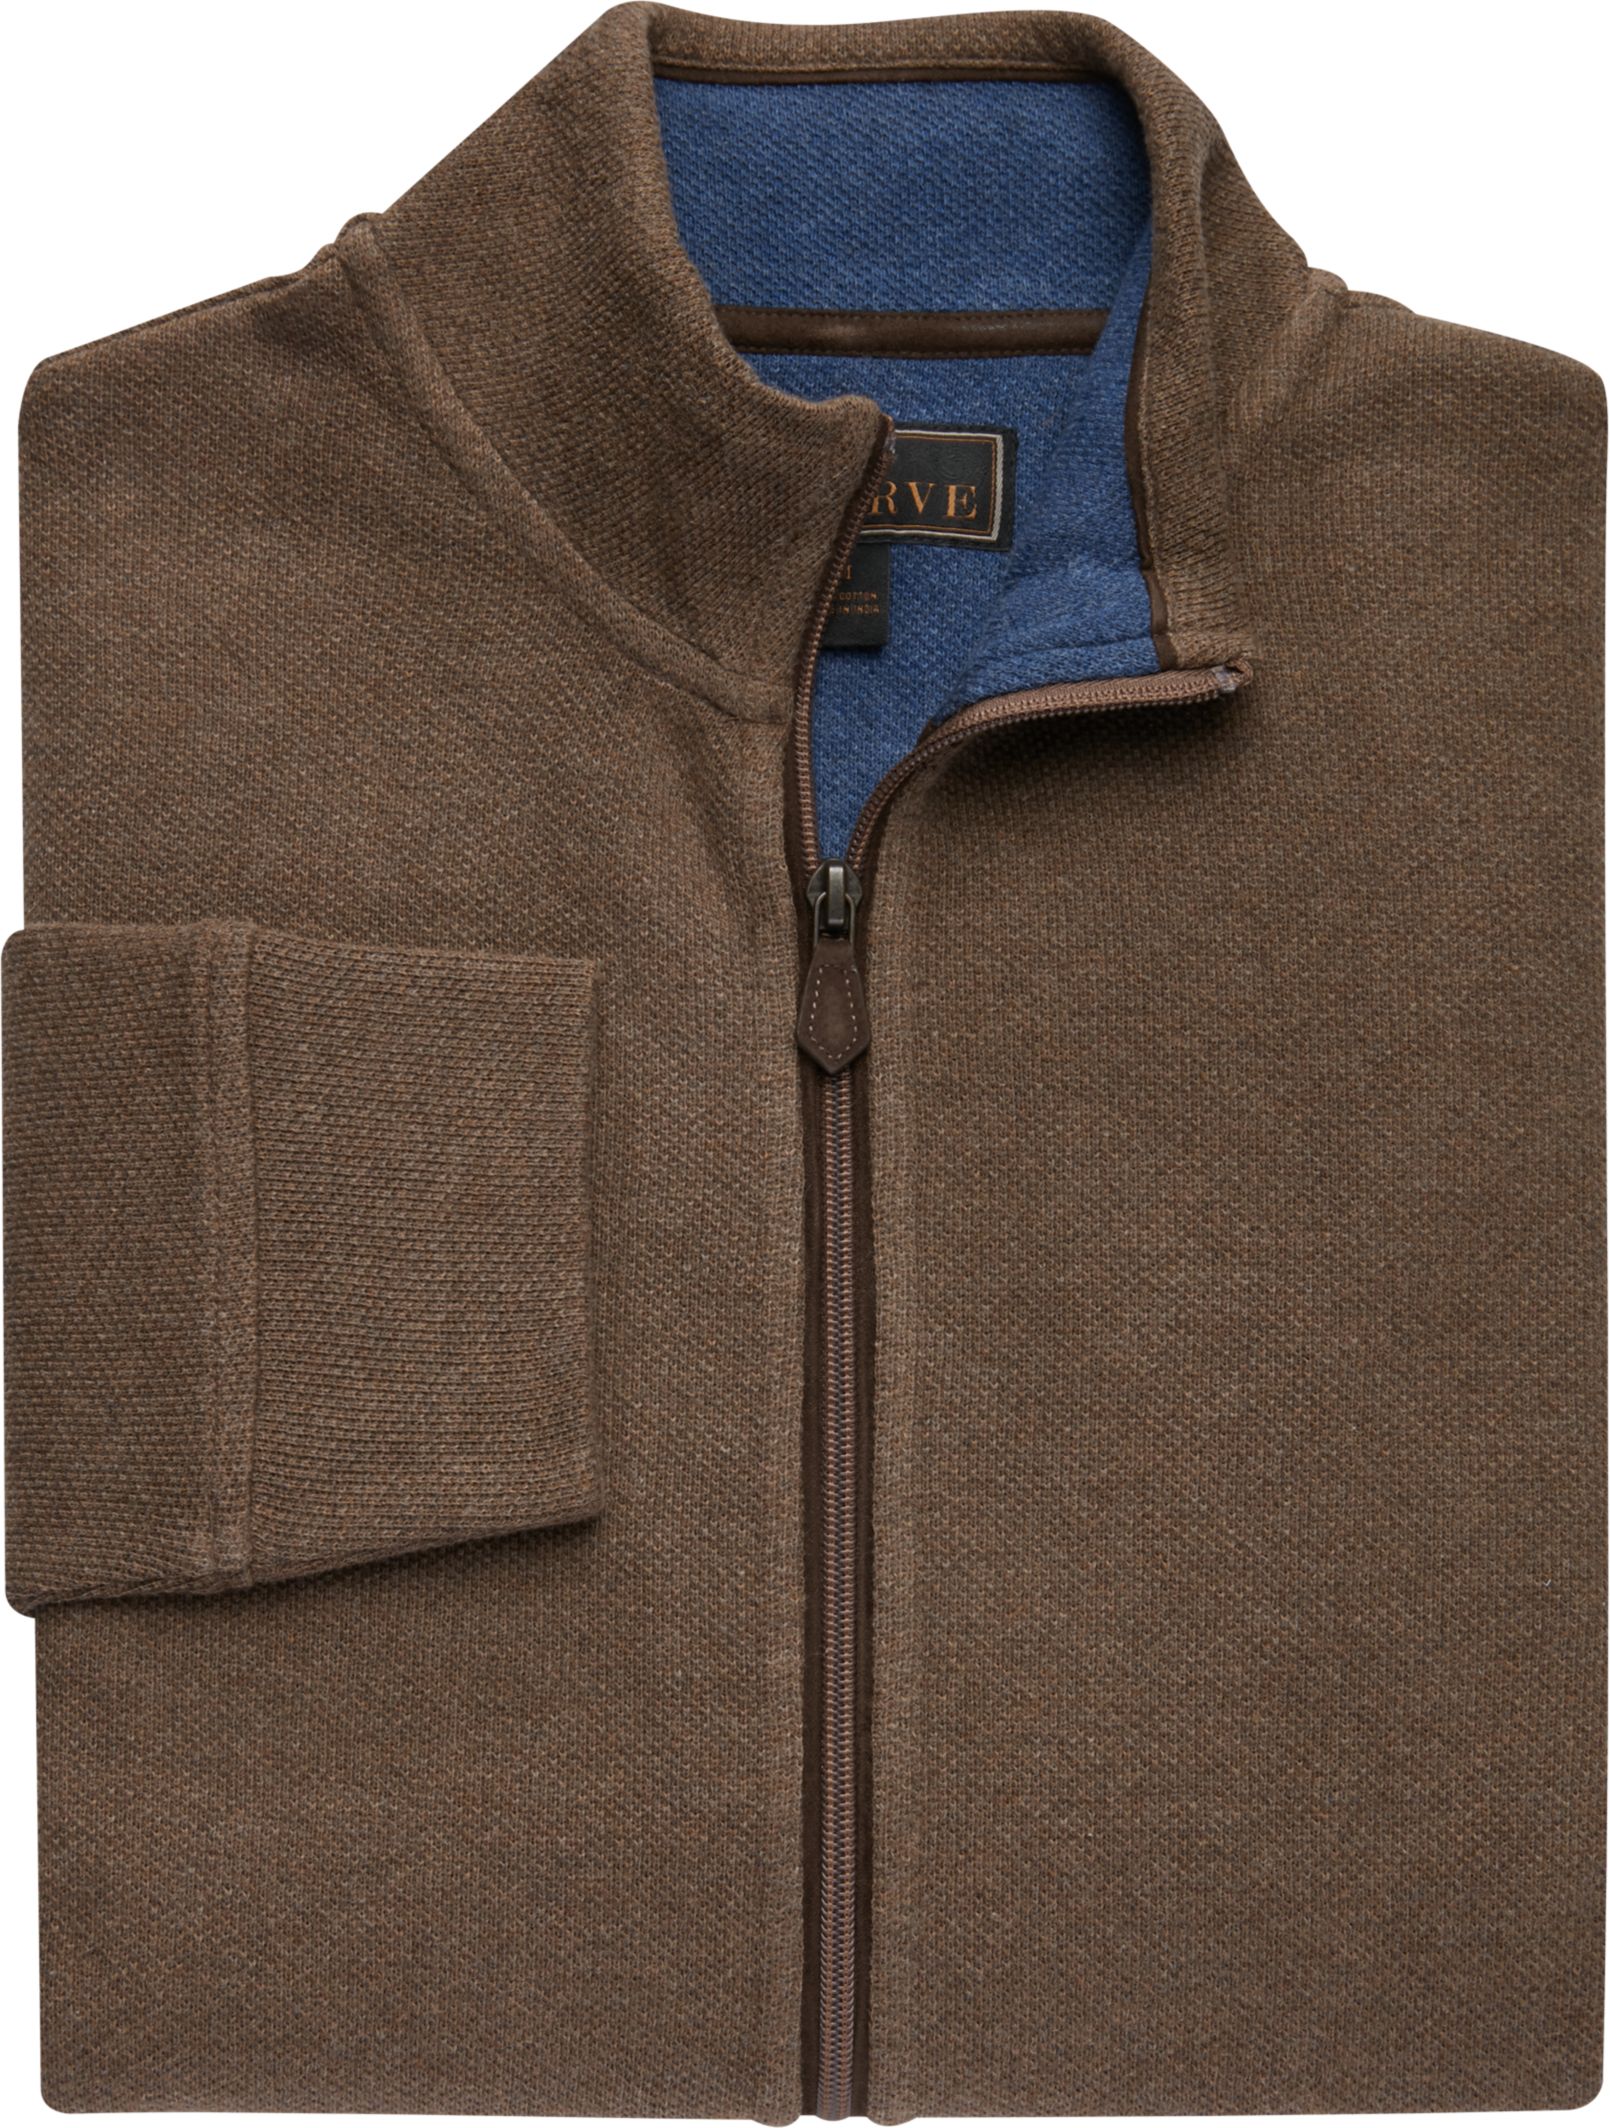 Reserve Collection Cotton Full-Zip Sweater CLEARANCE - $29 Pima Cotton